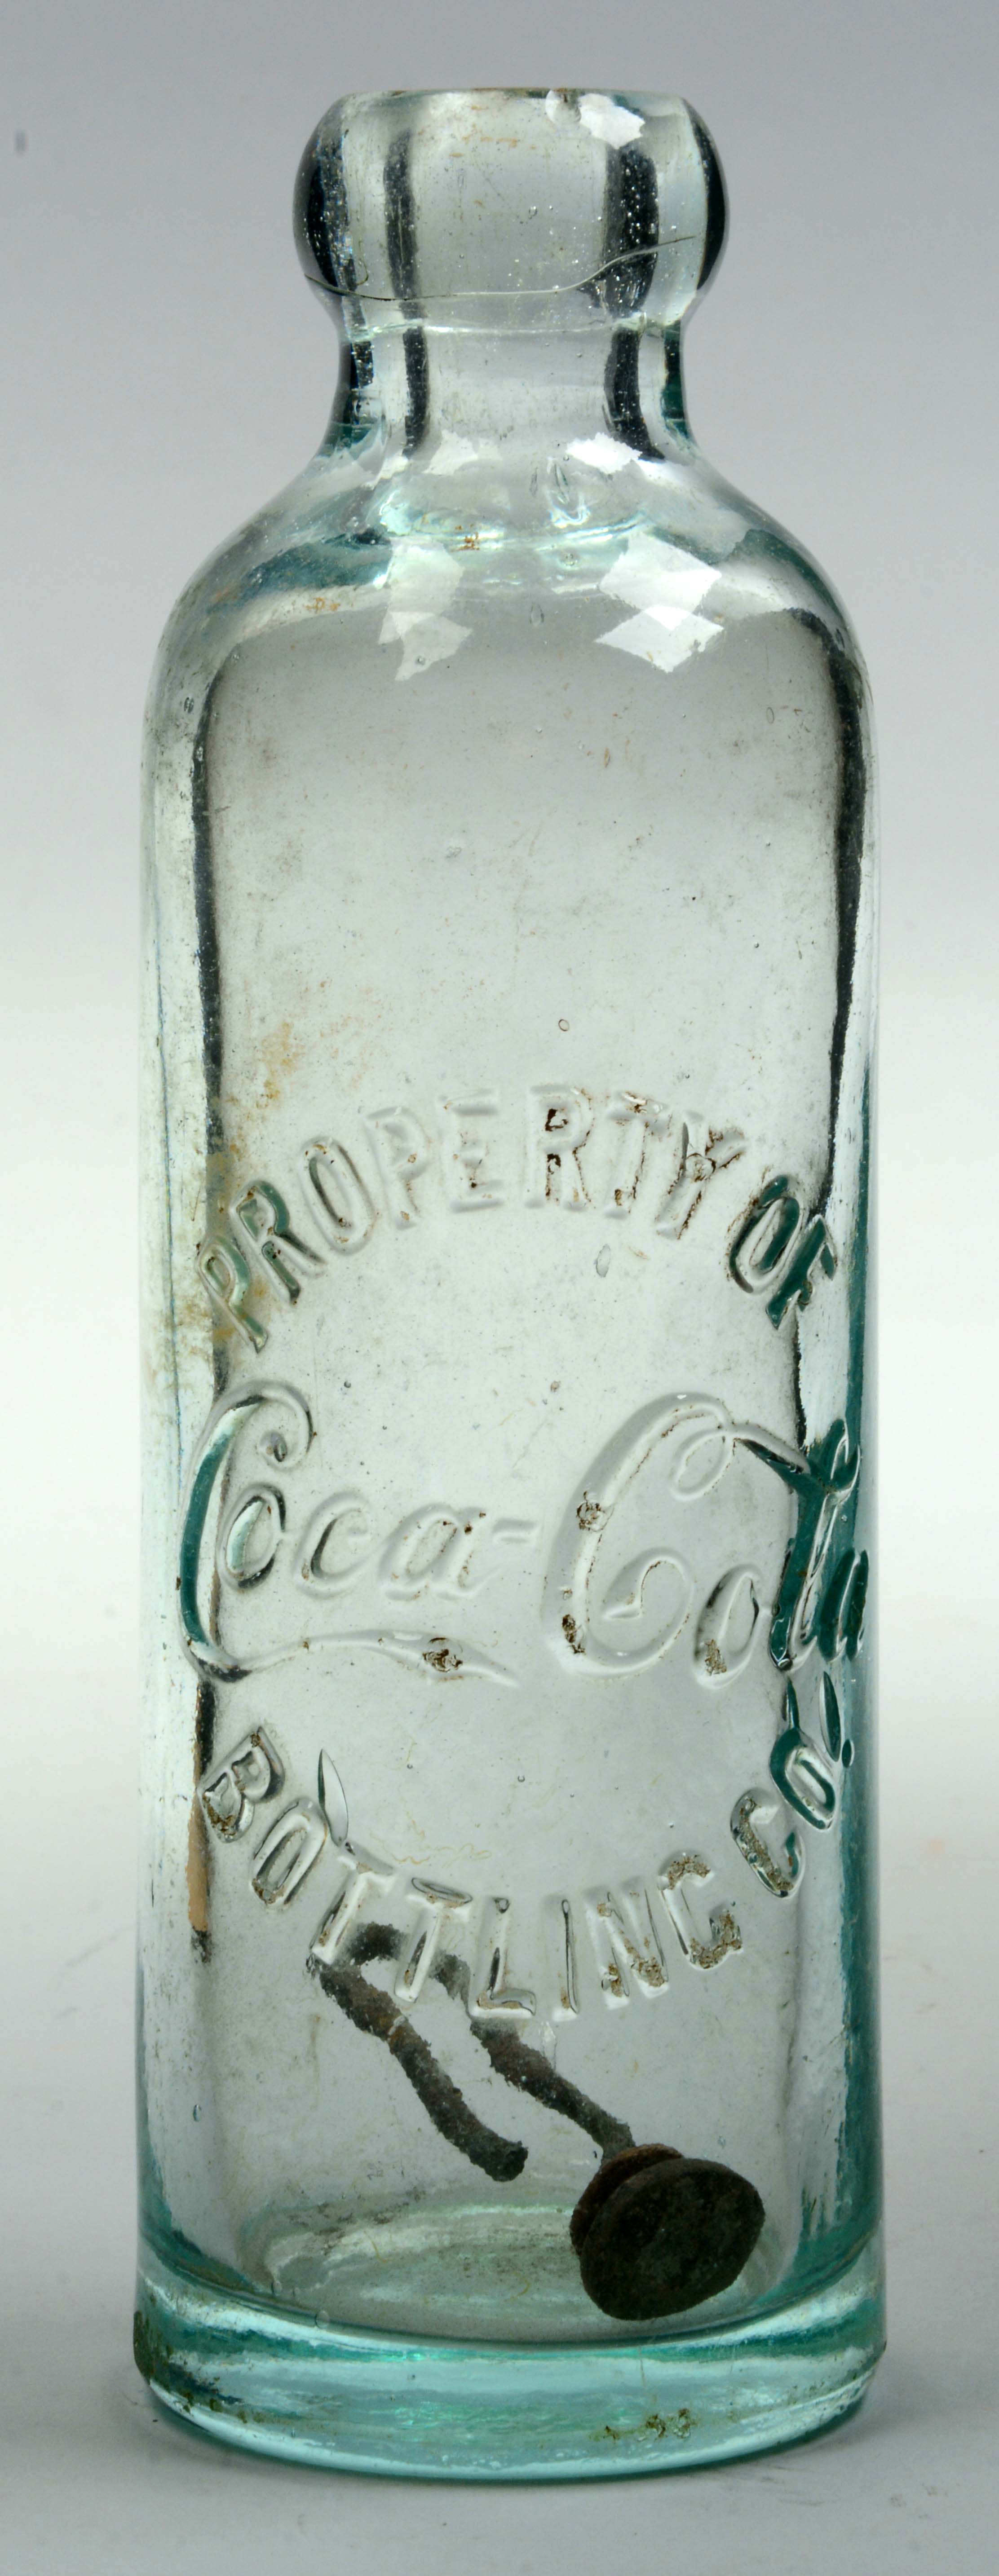 Early Coca-Cola Hutchinson Bottle, estimated at $4,000-6,000.